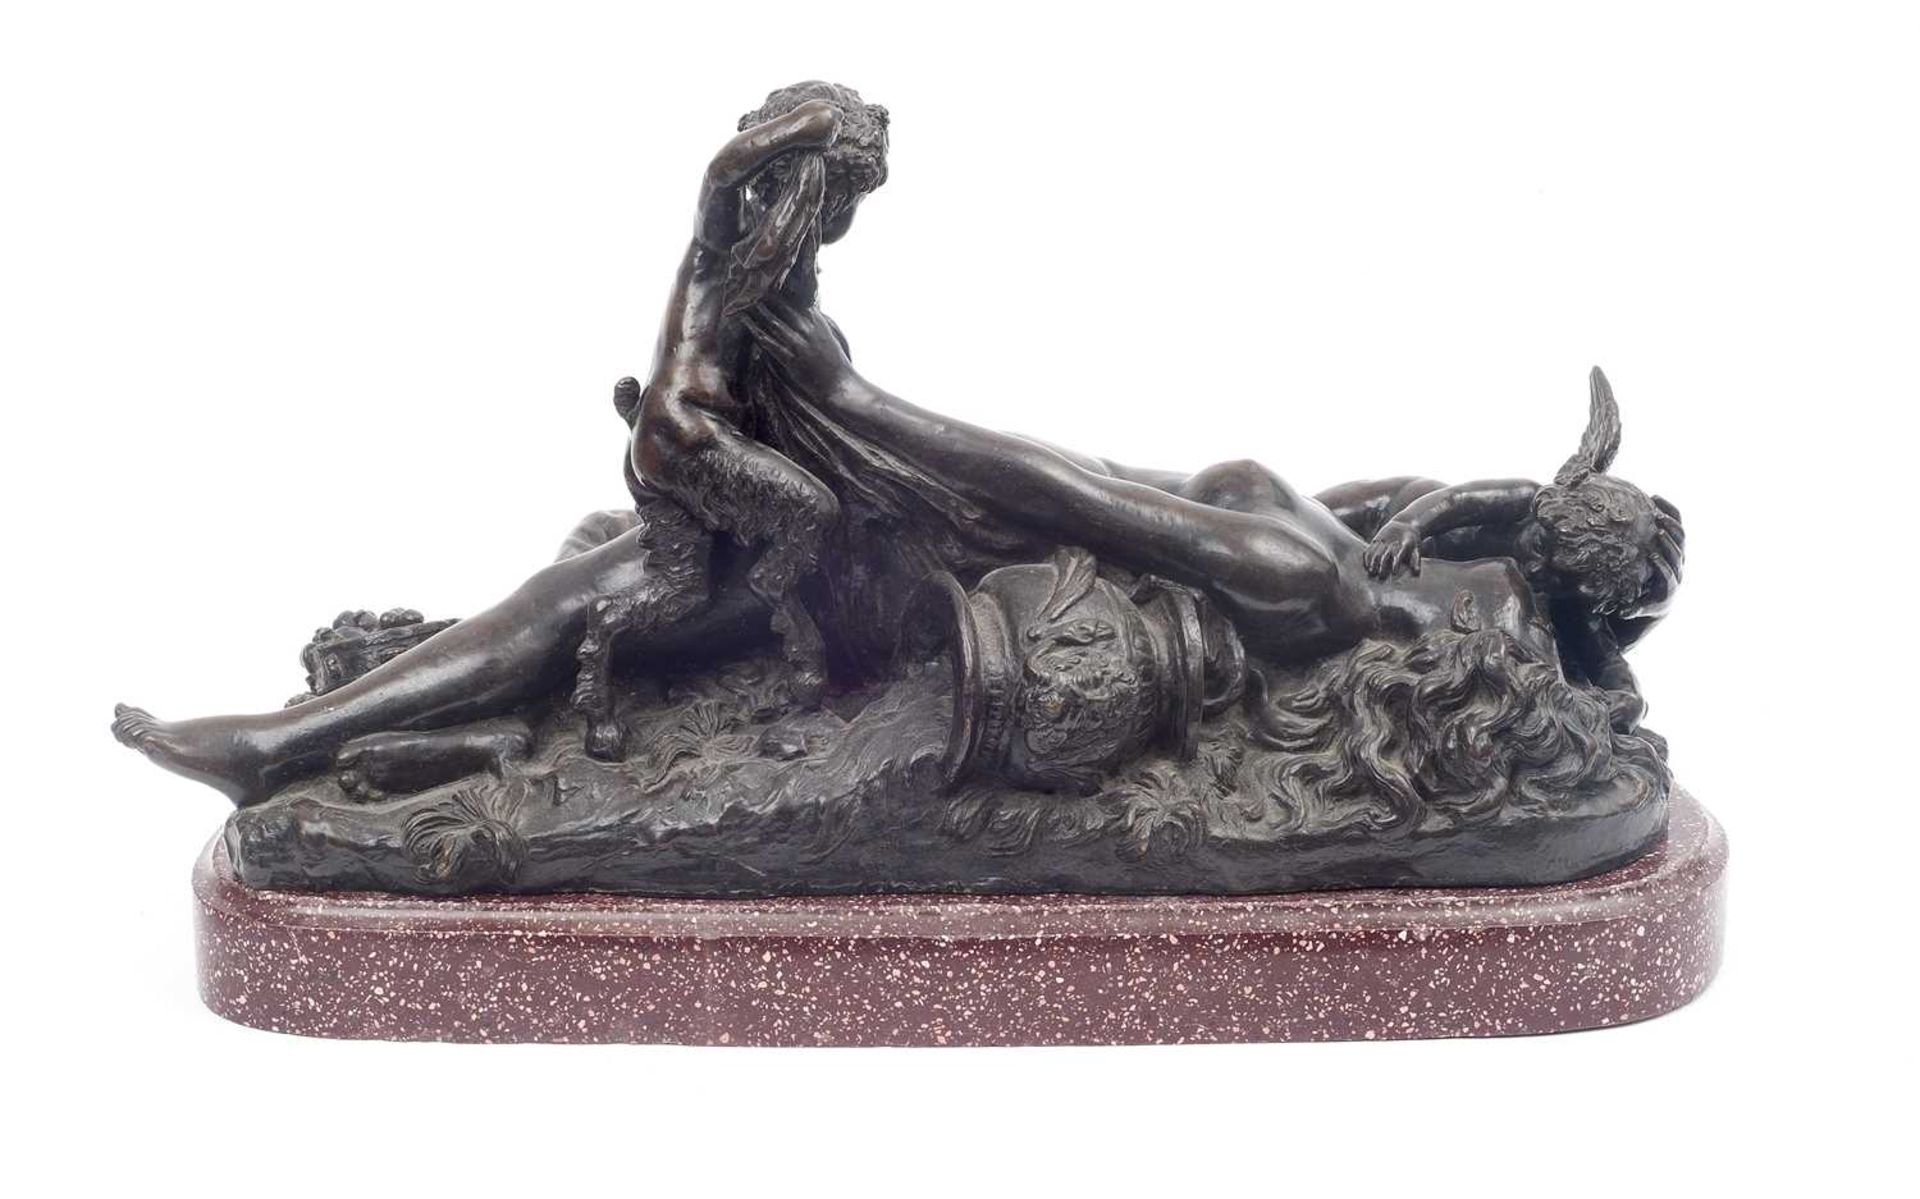 A LARGE 17TH CENTURY STYLE BRONZE EROTIC GROUP, PROBABLY 19TH CENTURY - Image 2 of 6